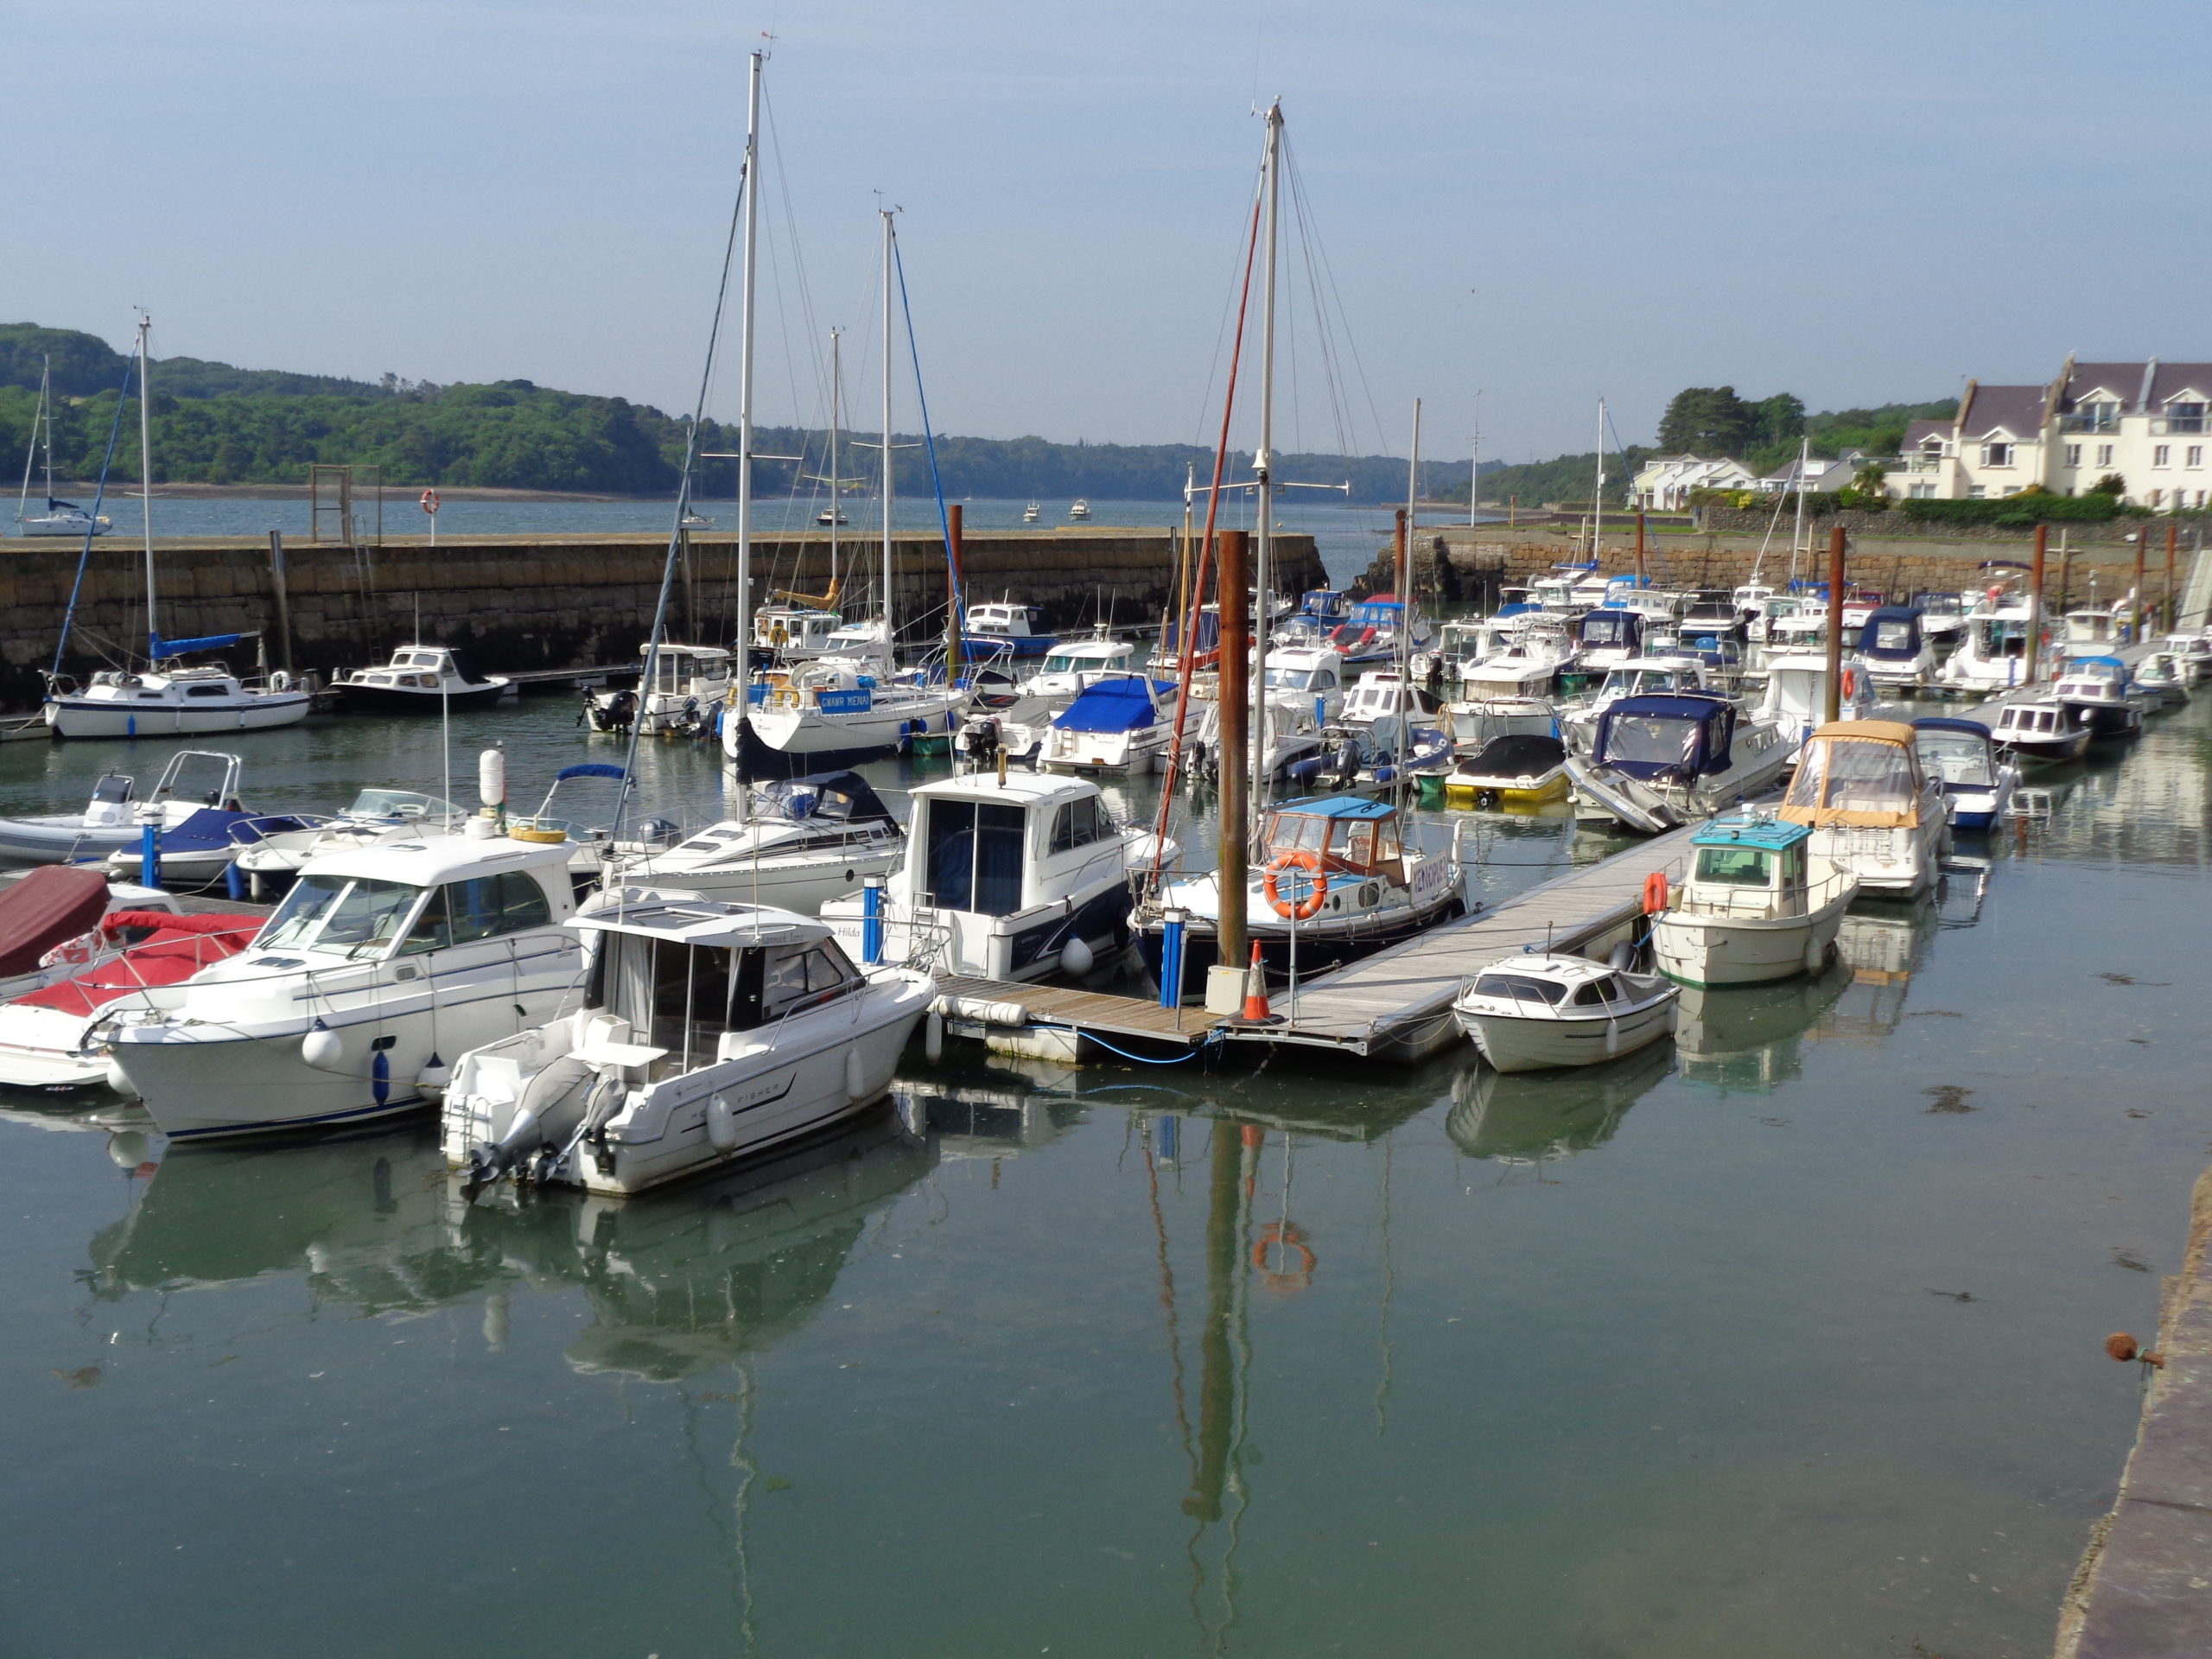 Marina with boats moored to pontoons inside